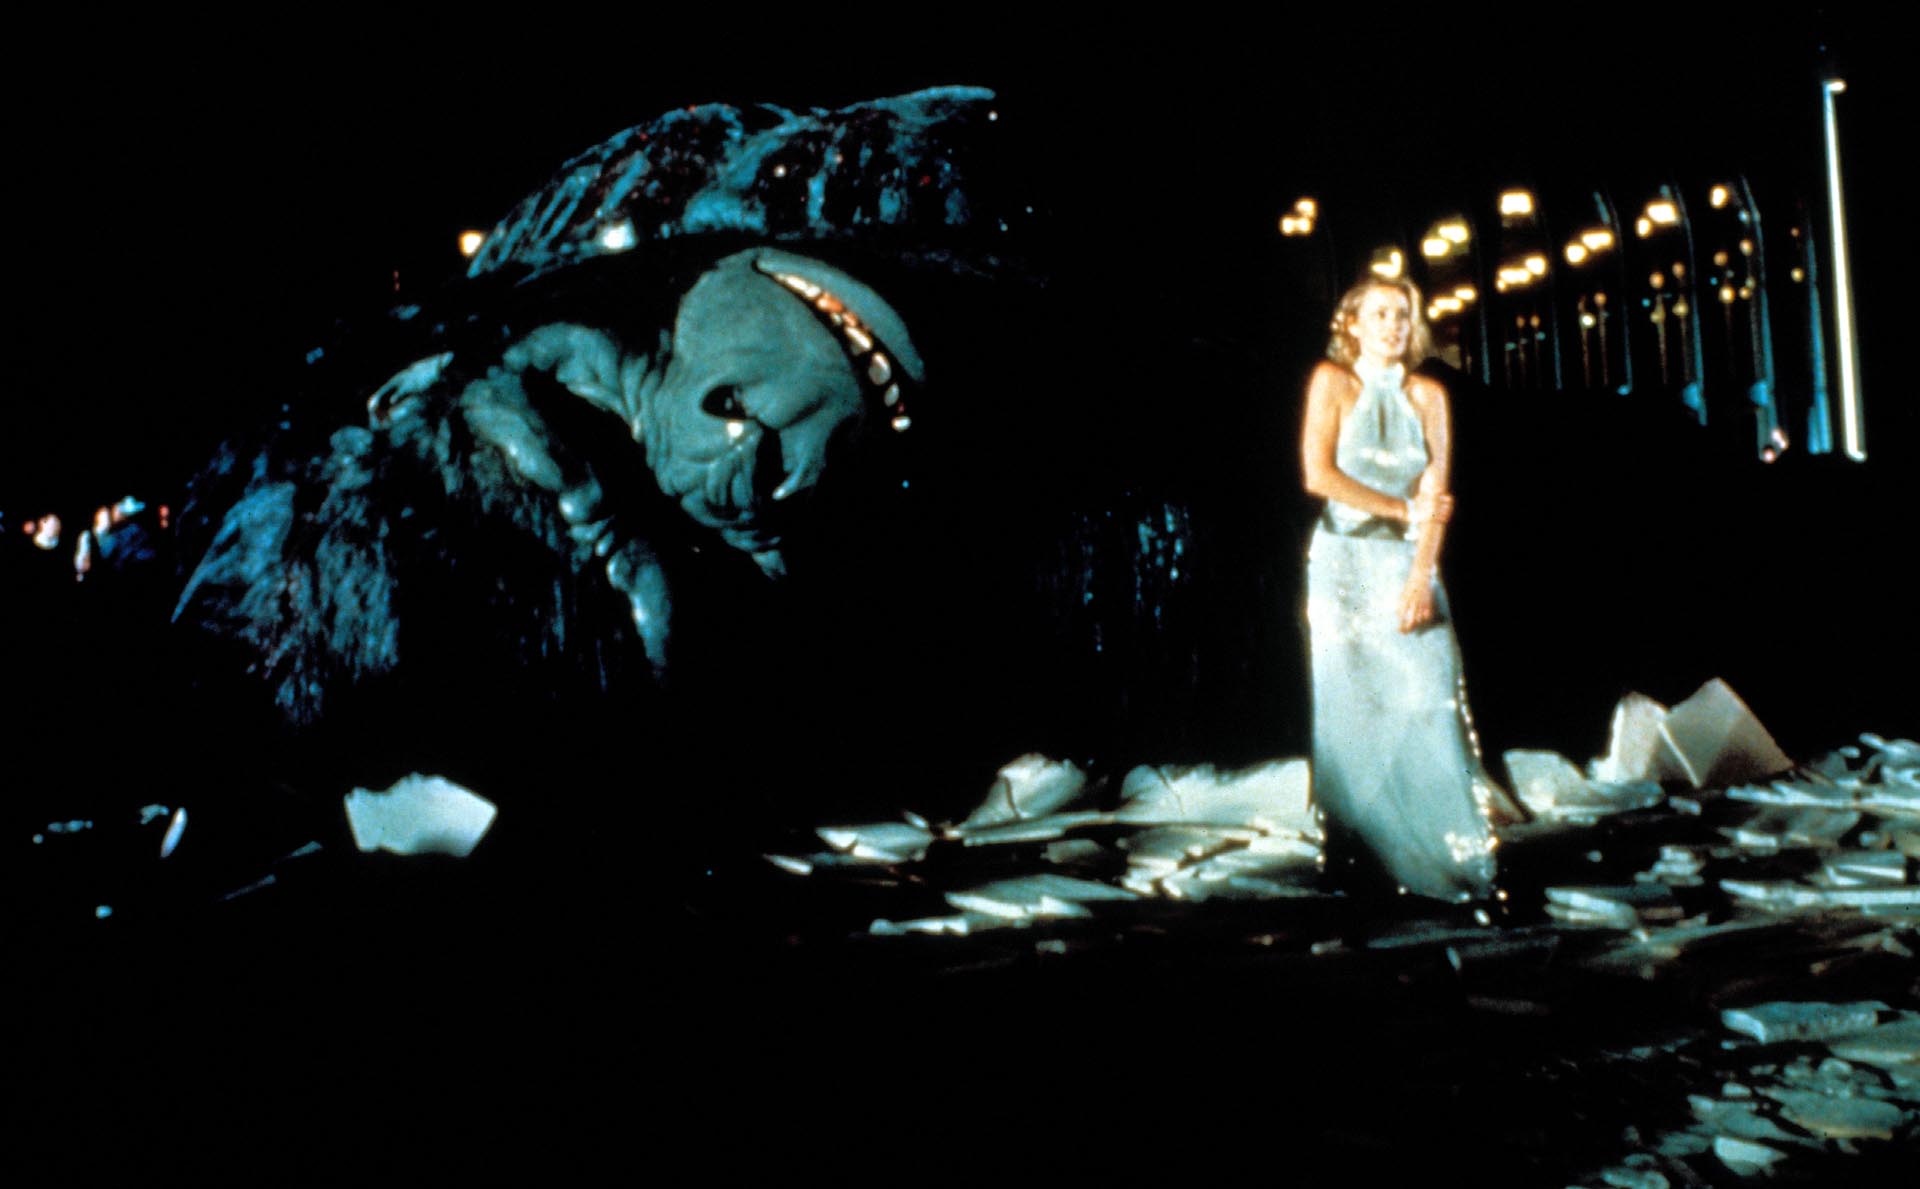 Jessica Lange in the film "King Kong" from 1976. (Credit: Shutterstock)